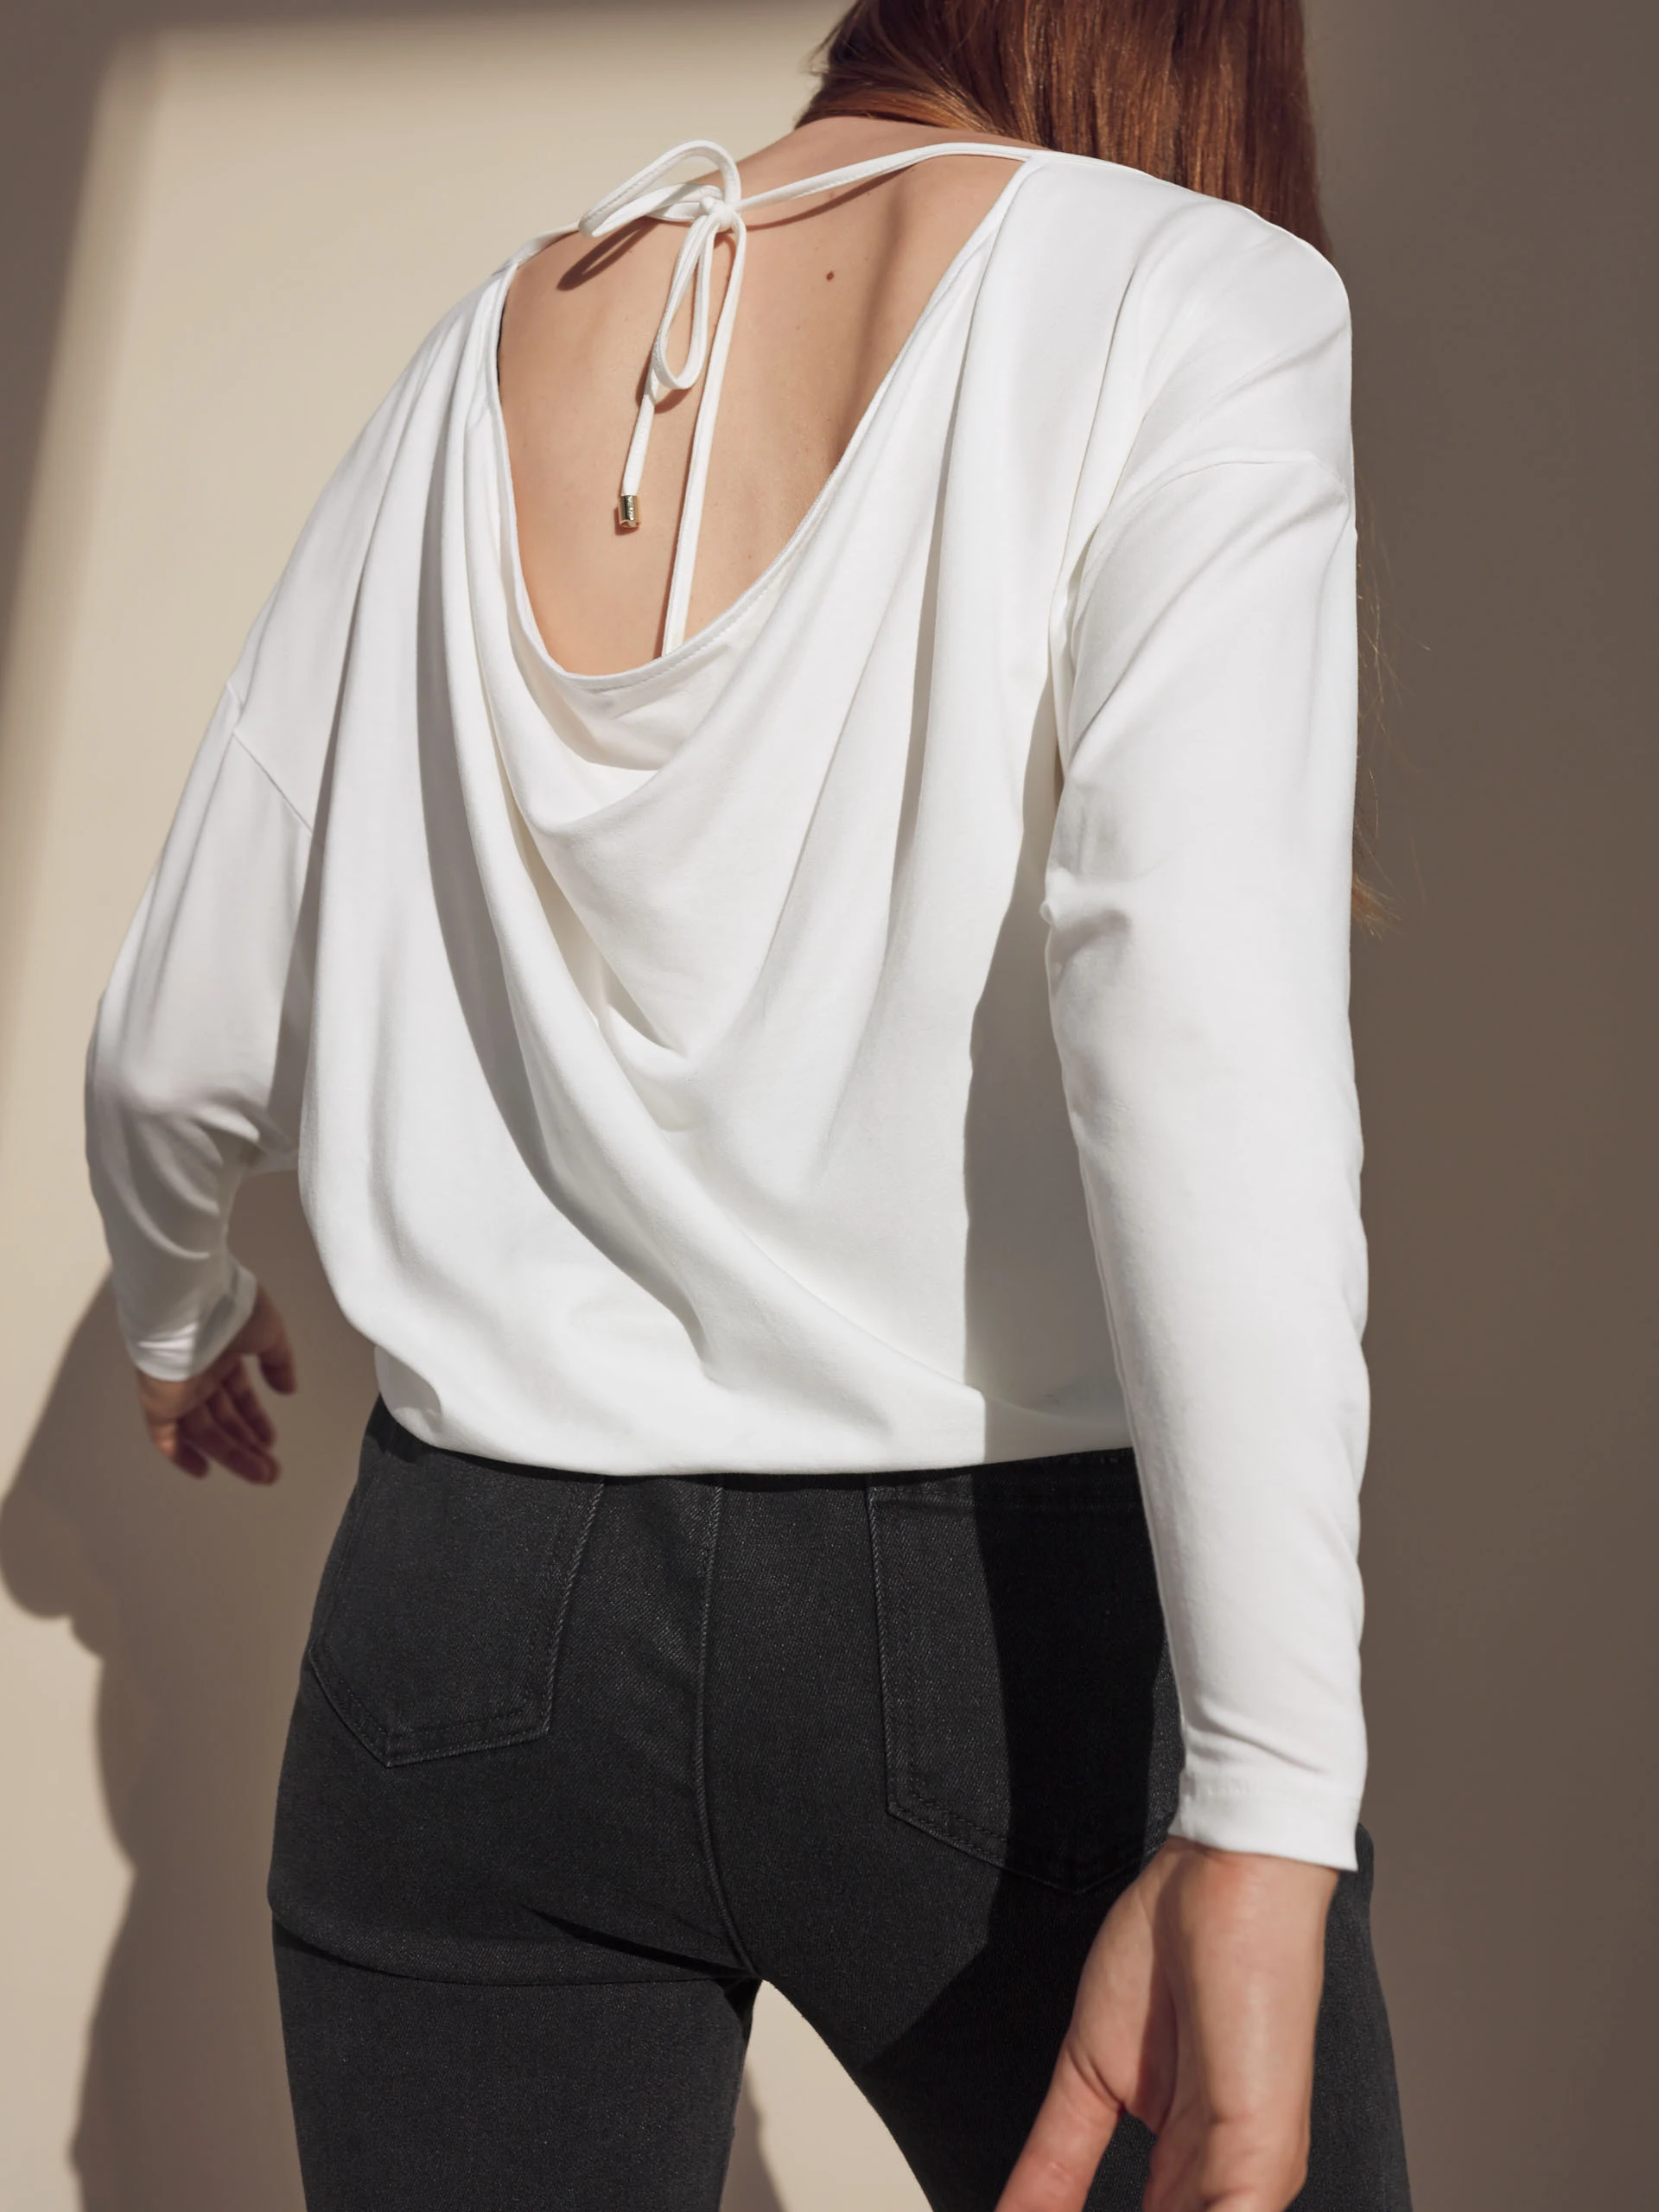 Blouse with cut-out at the back in white